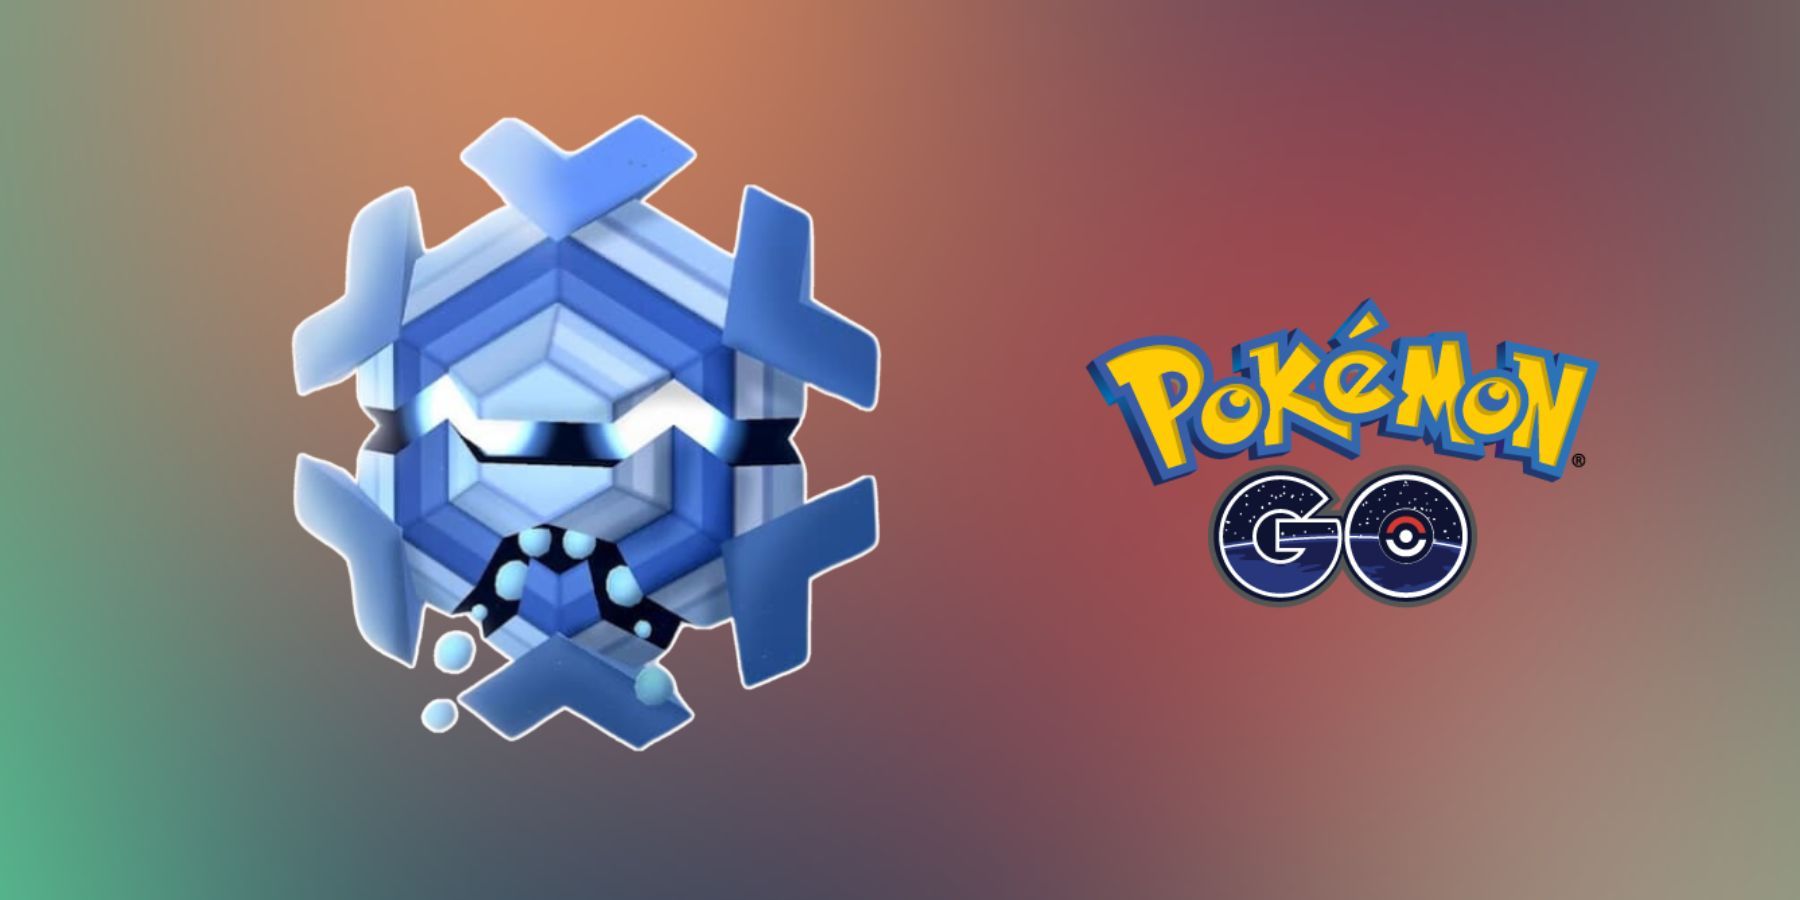 Pokemon GO World of Wonders - All Special Research Tasks And Rewards